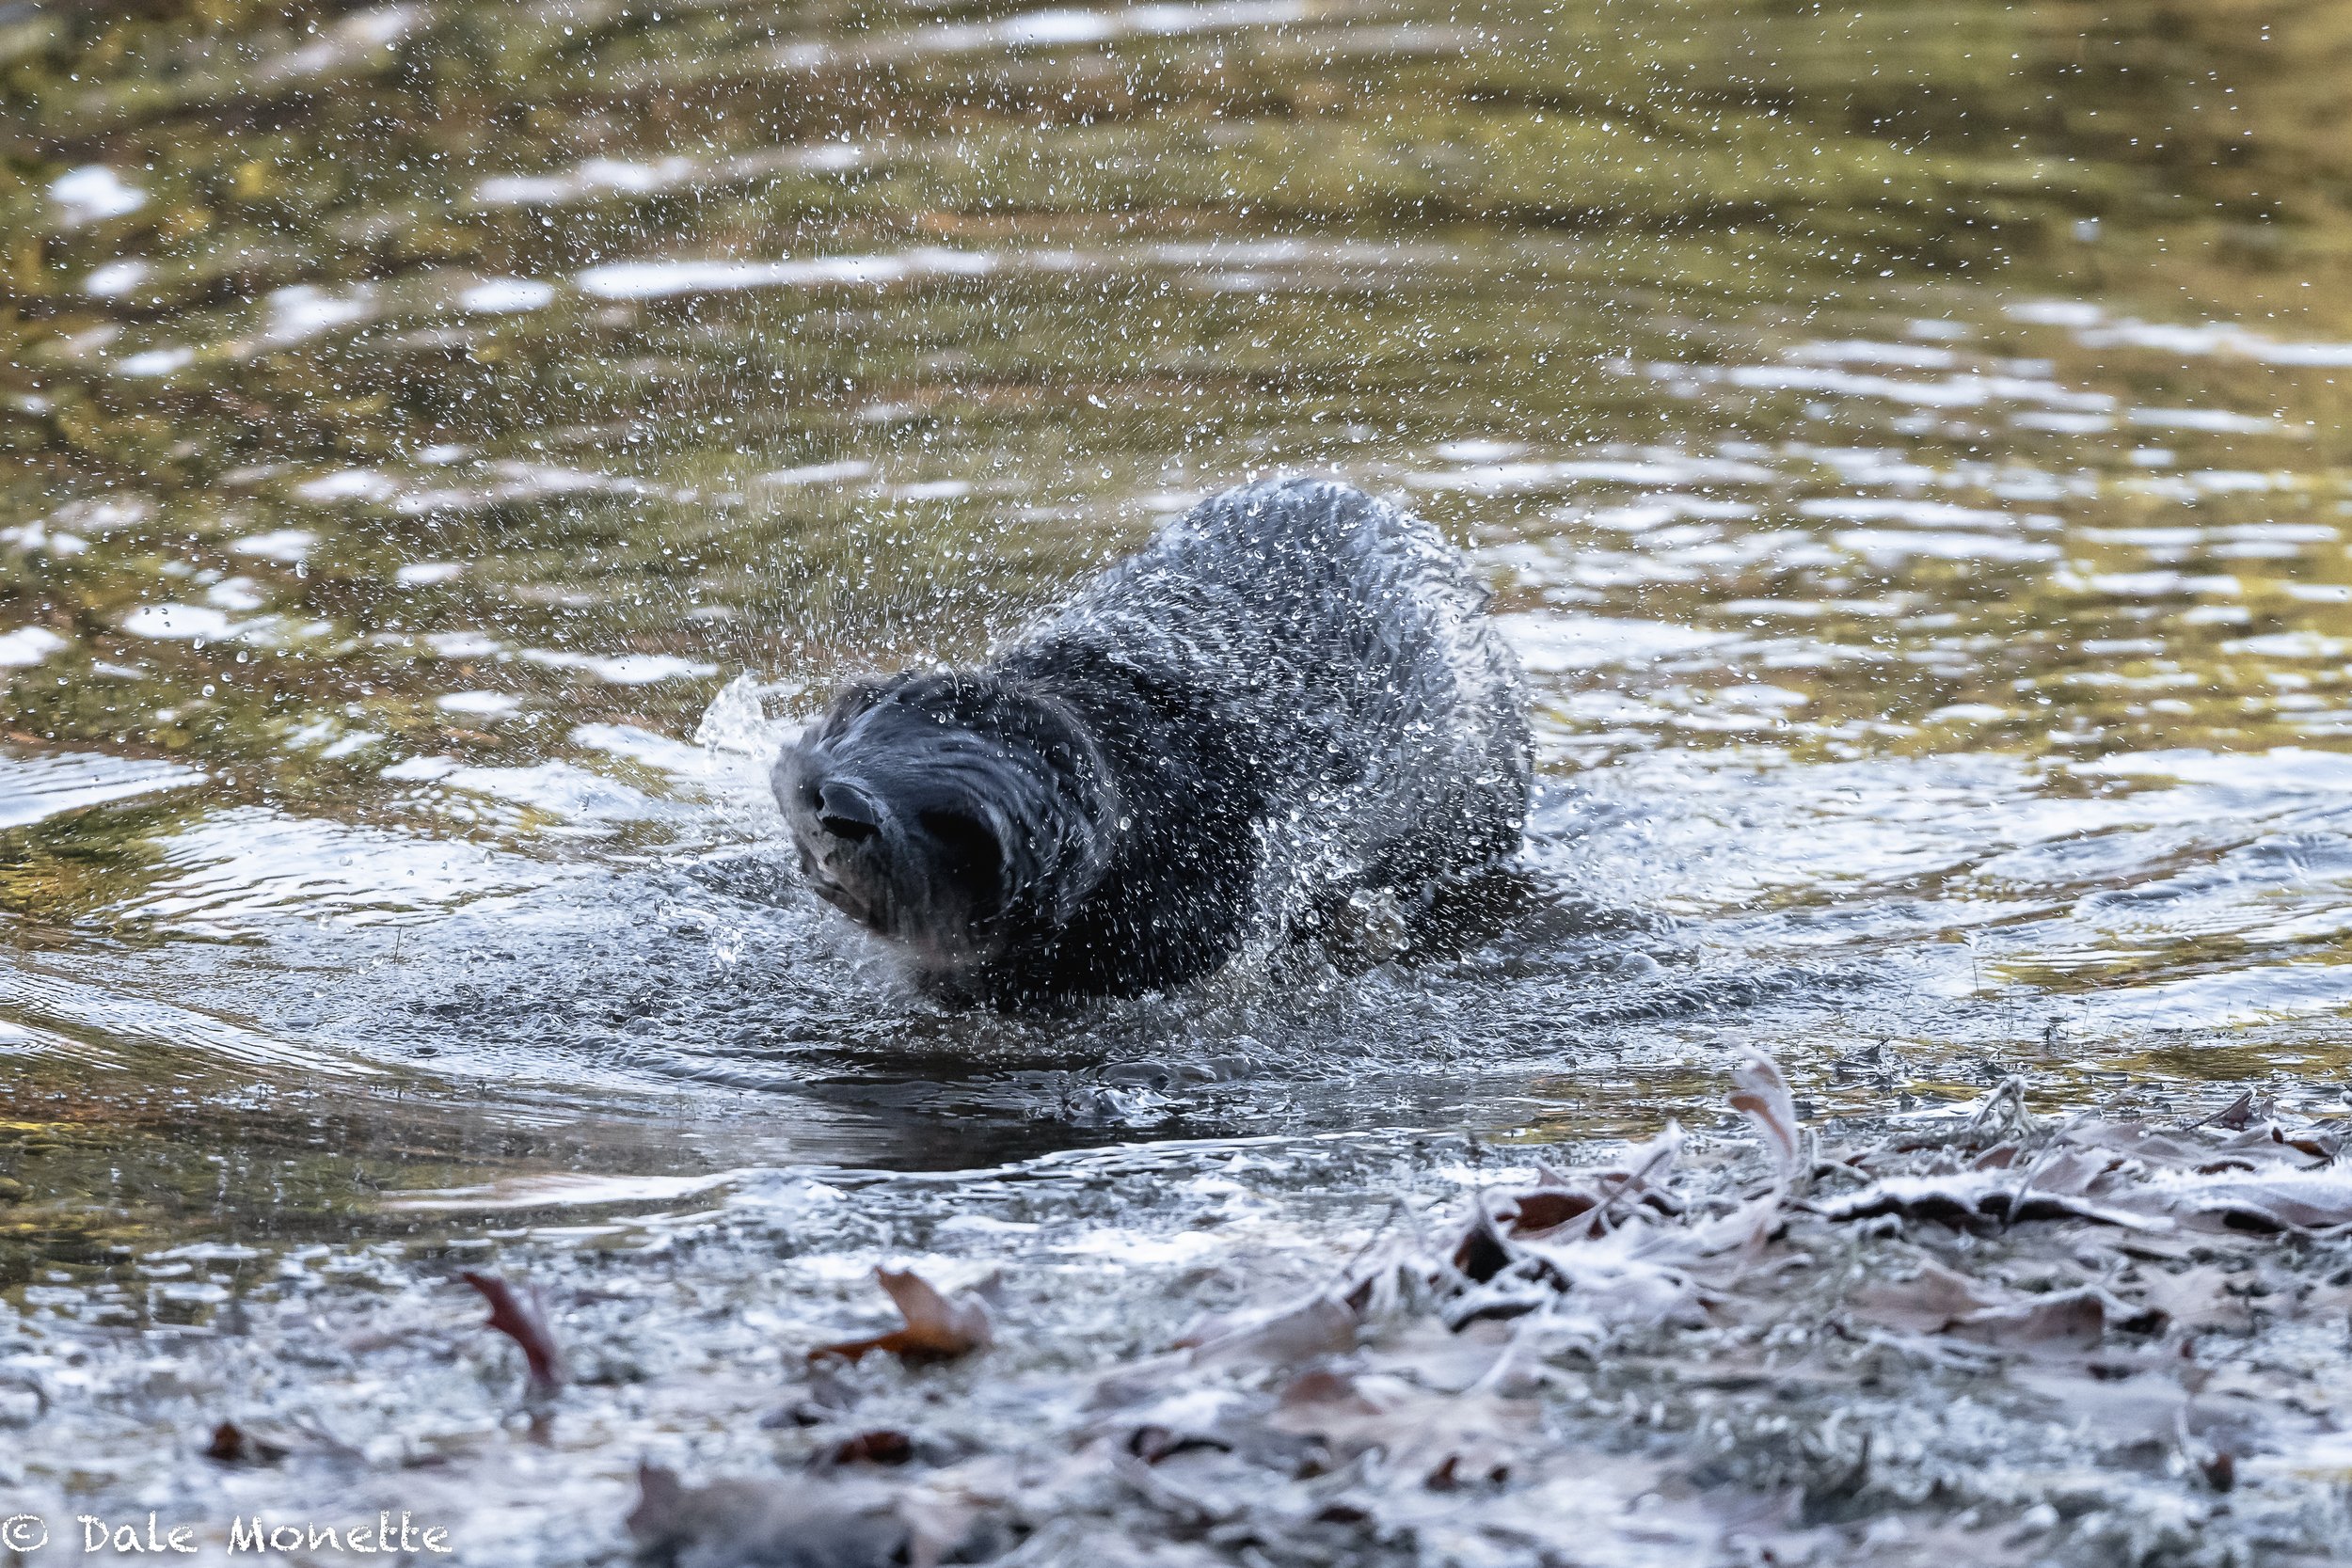   It pays to have a camera with an electronic shutter = no shutter noise!    Animals walk right by me when I’m taking photos and never see or hear me like this otter that shook right in front of me!  